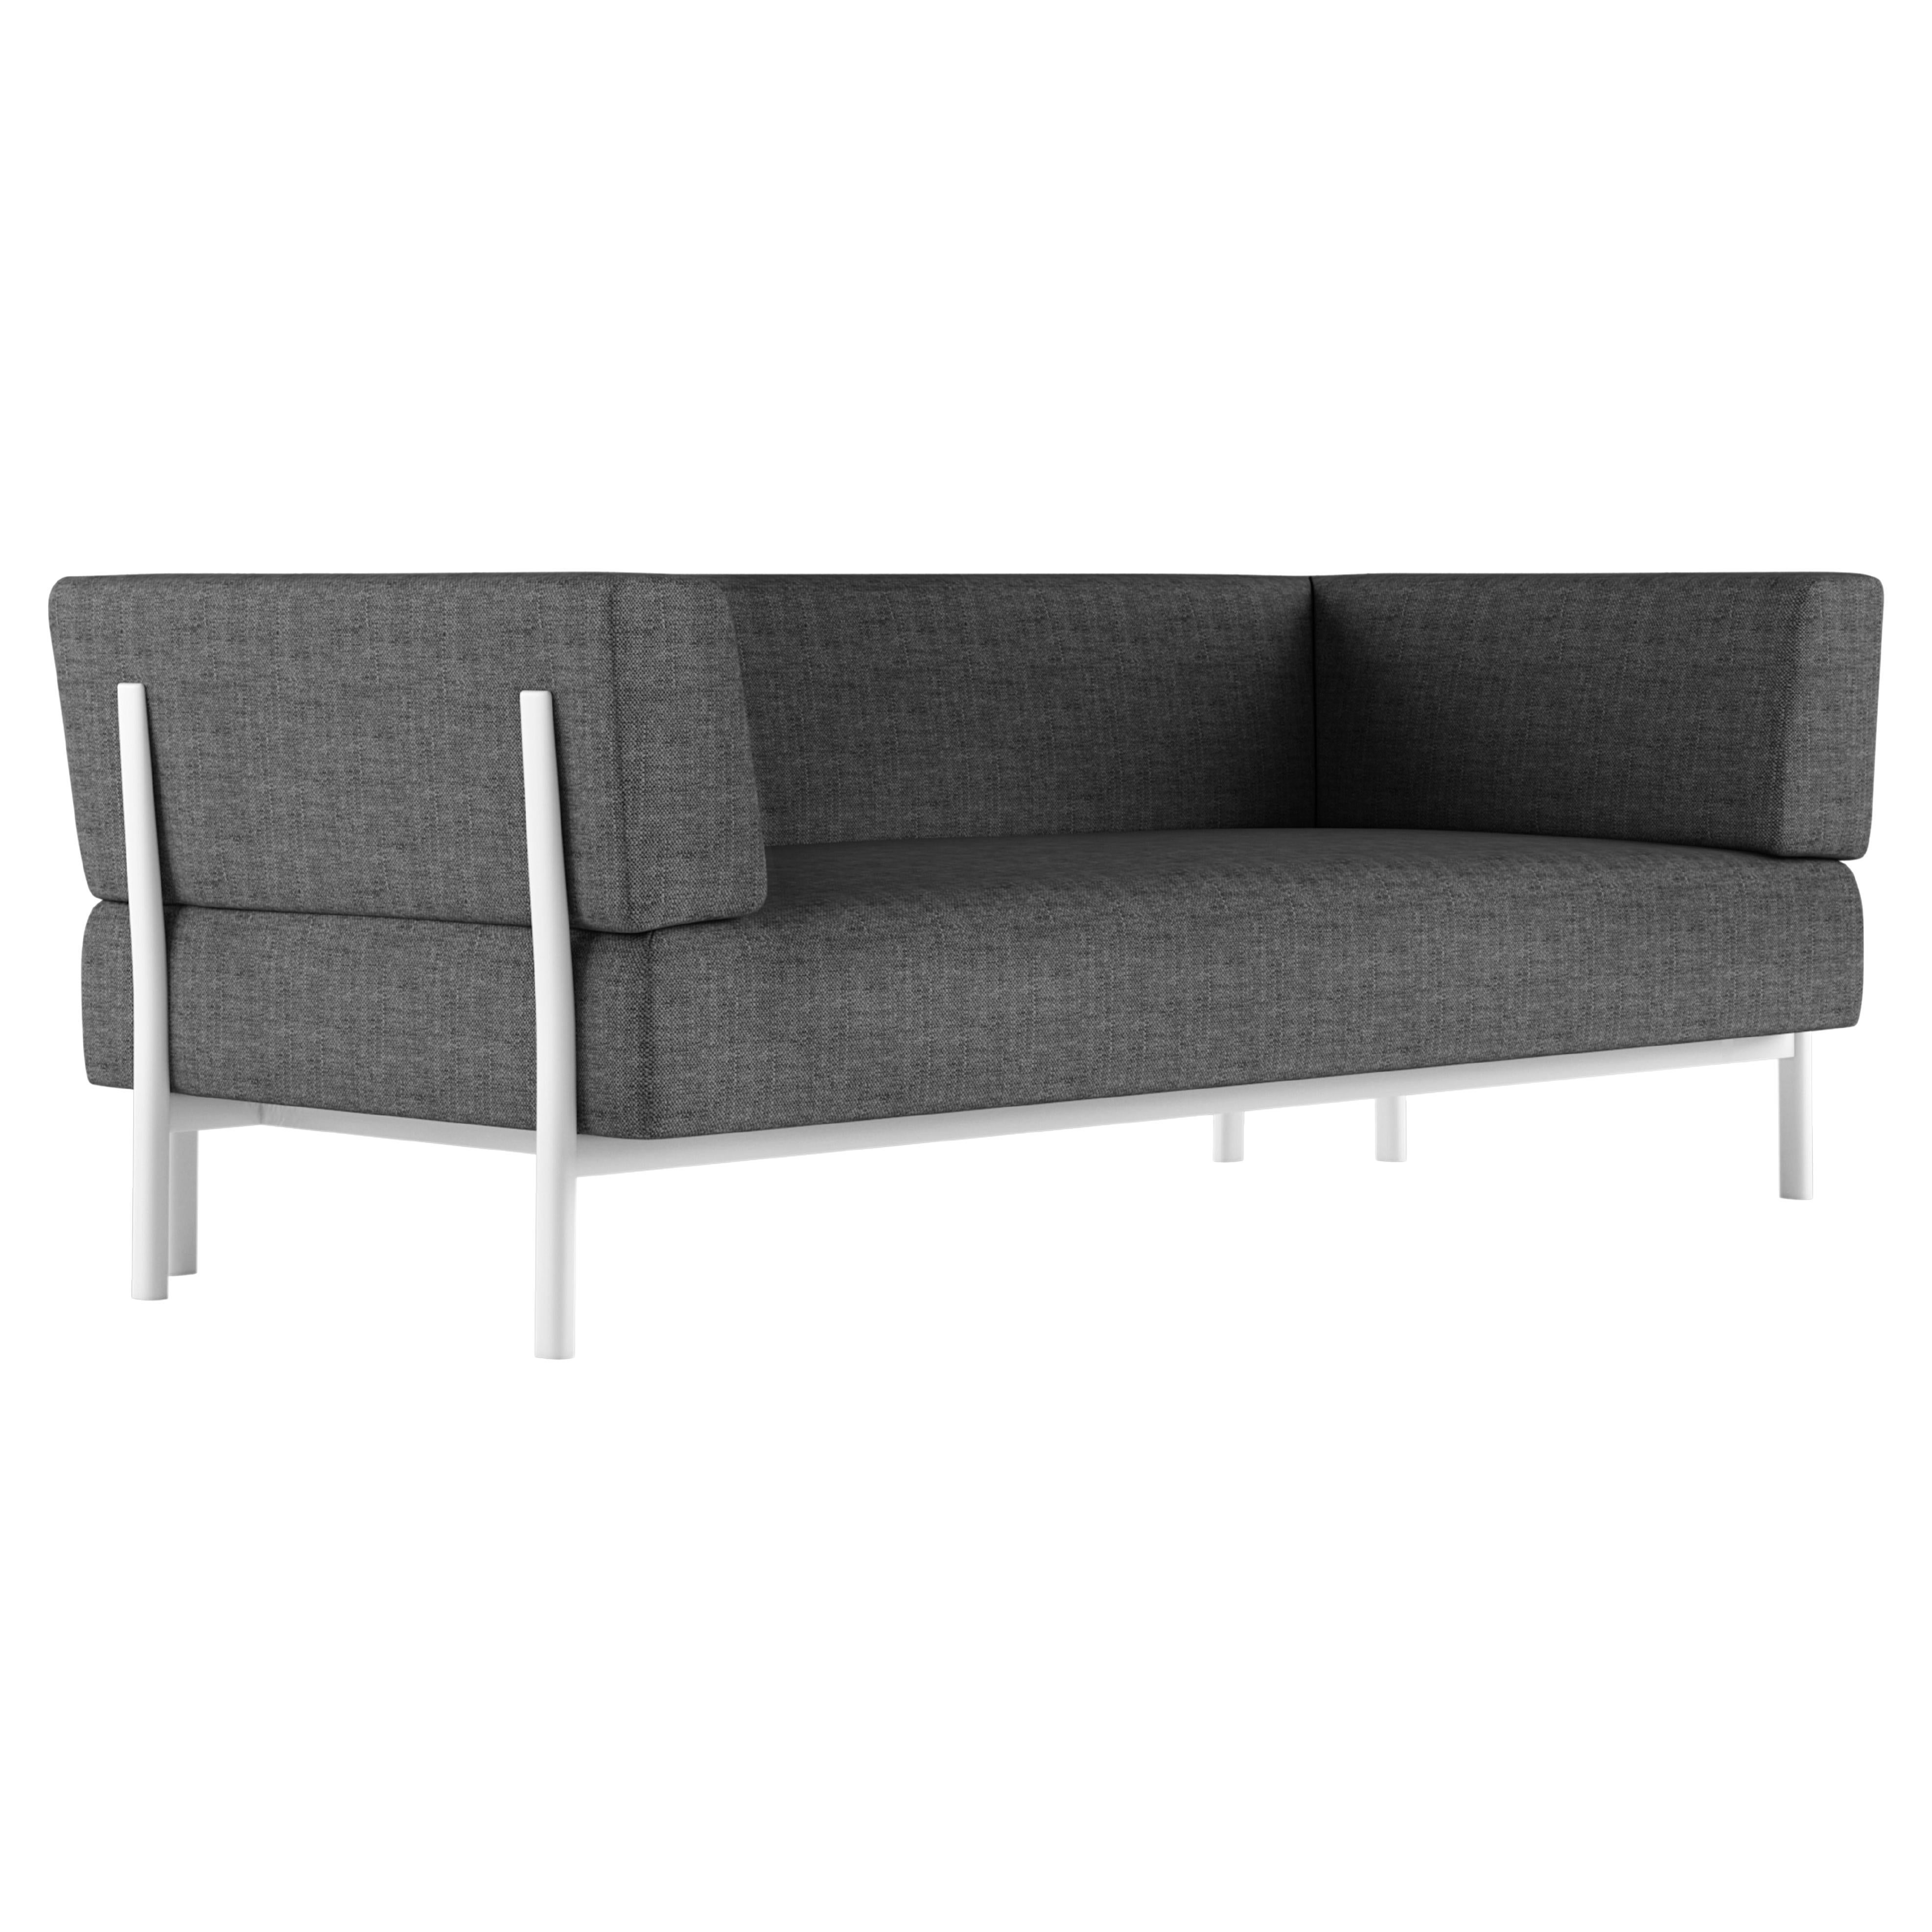 Alias T02_O Ten 2 Seater Outdoor Sofa in Dark Grey and White Lacquered Frame For Sale